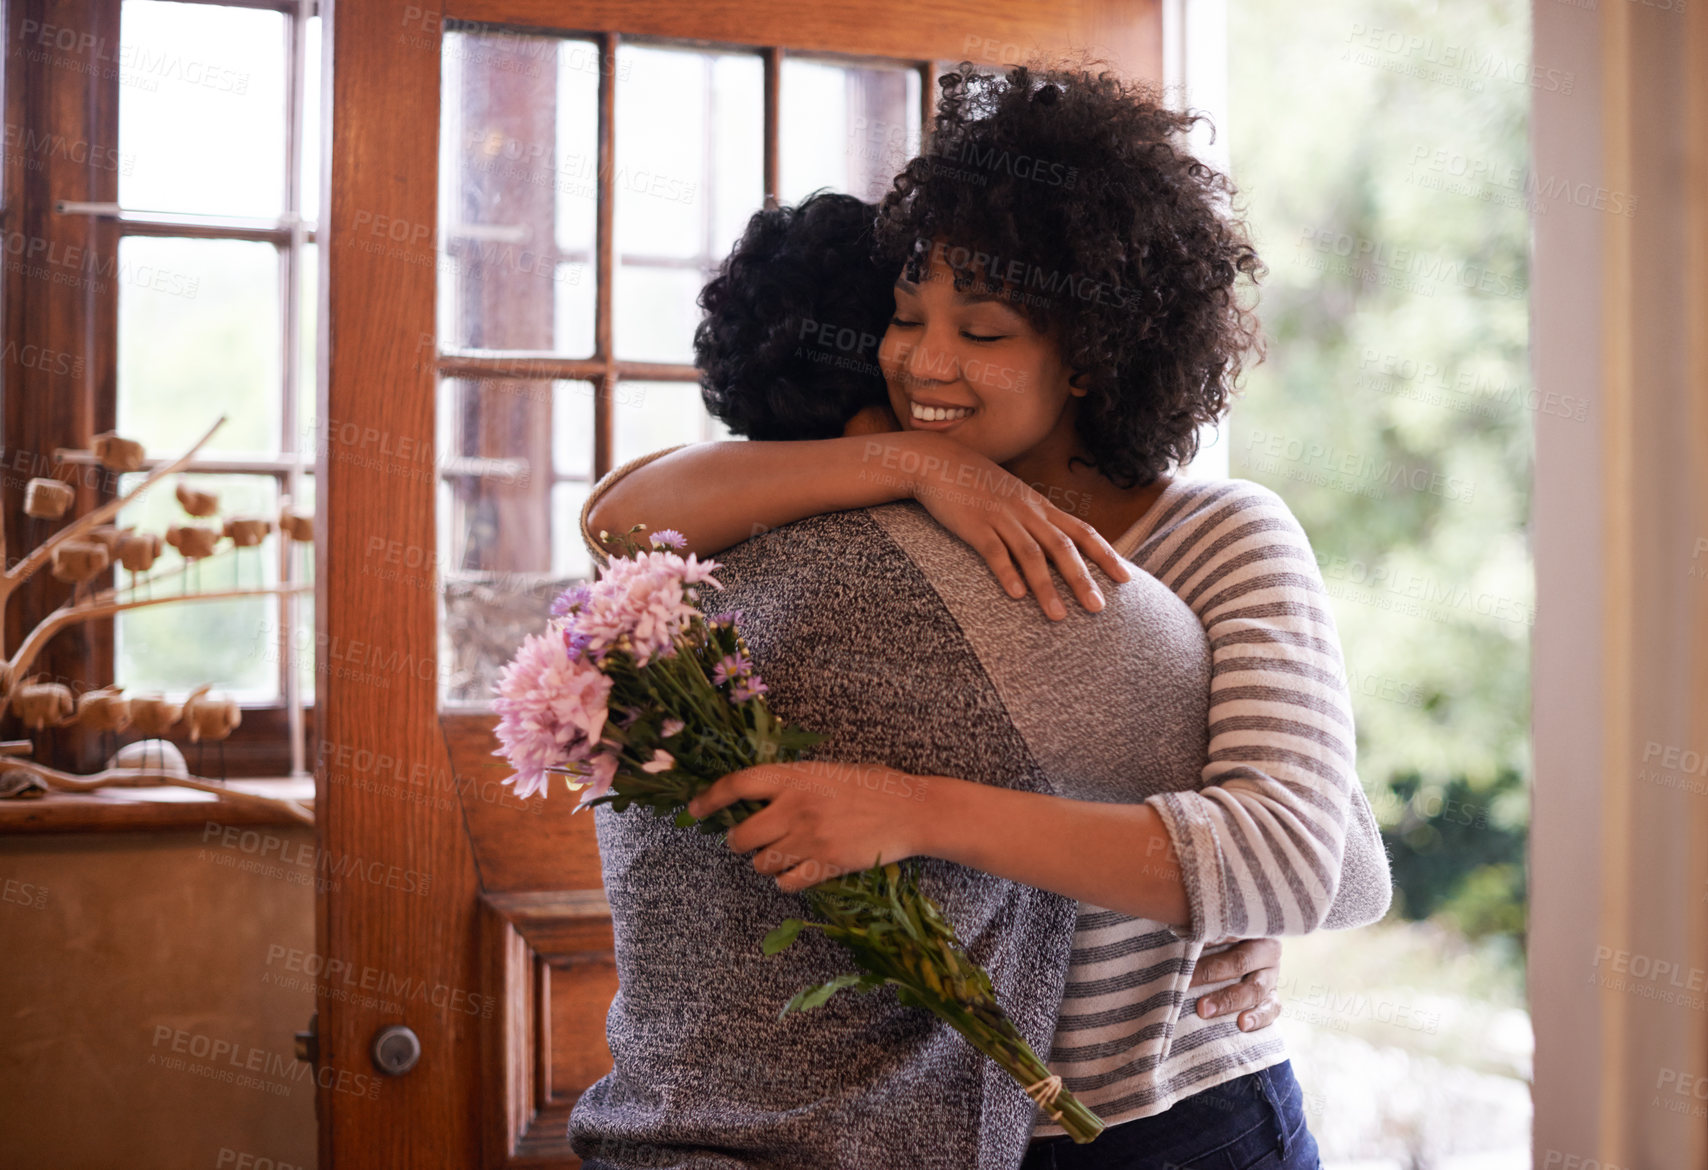 Buy stock photo Cropped shot of an affectionate young couple hugging in the doorway